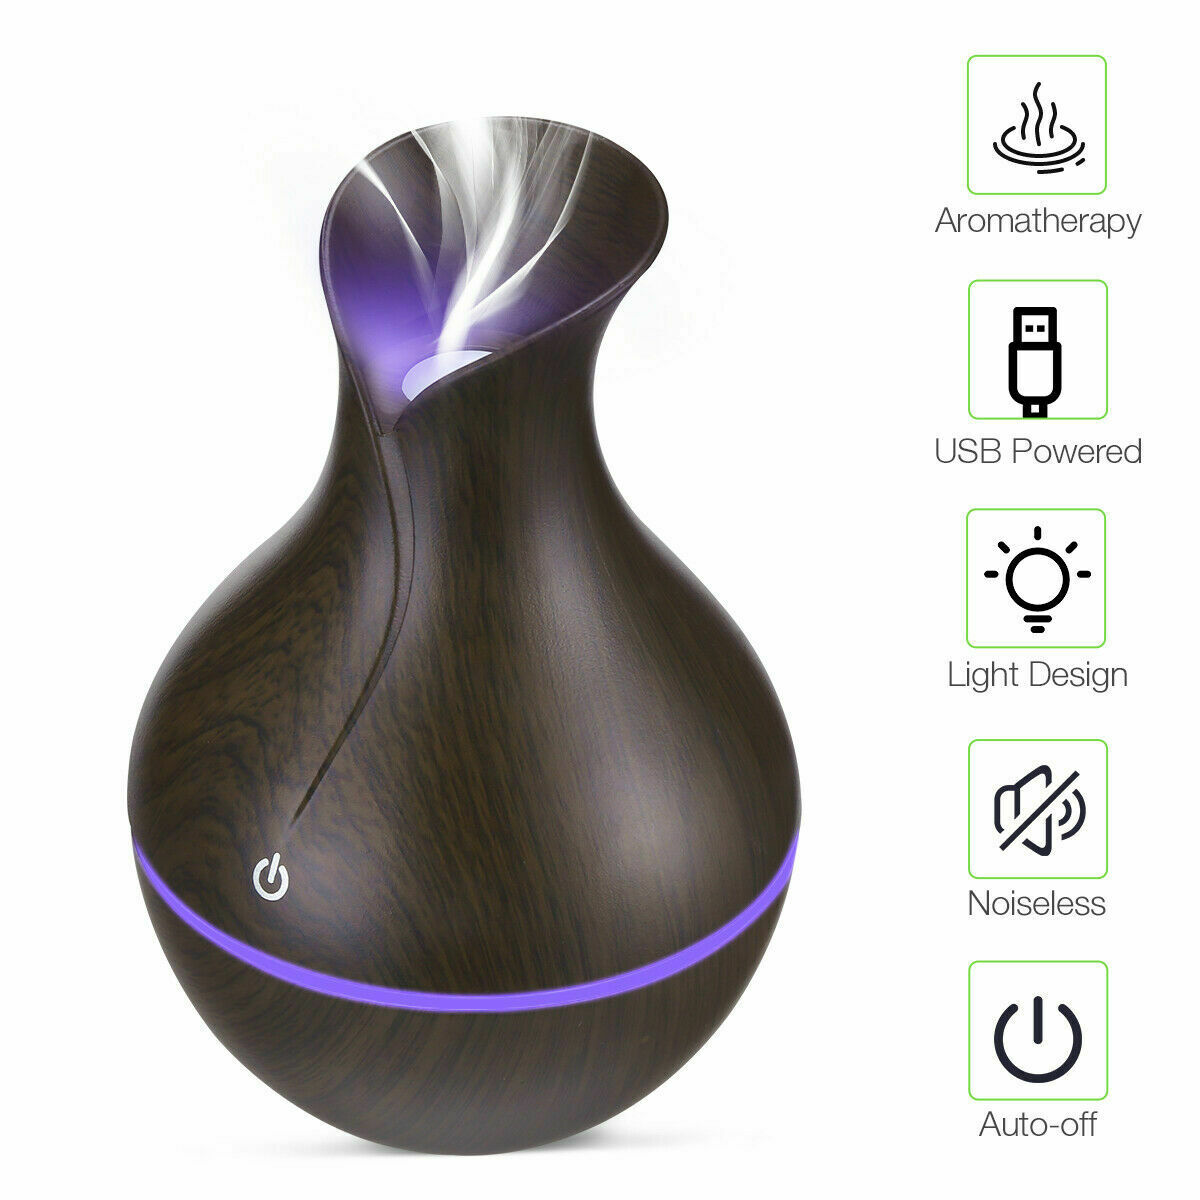 Ultrasonic Humidifier Oil Diffuser Air Purifier Aromatherapy with LED